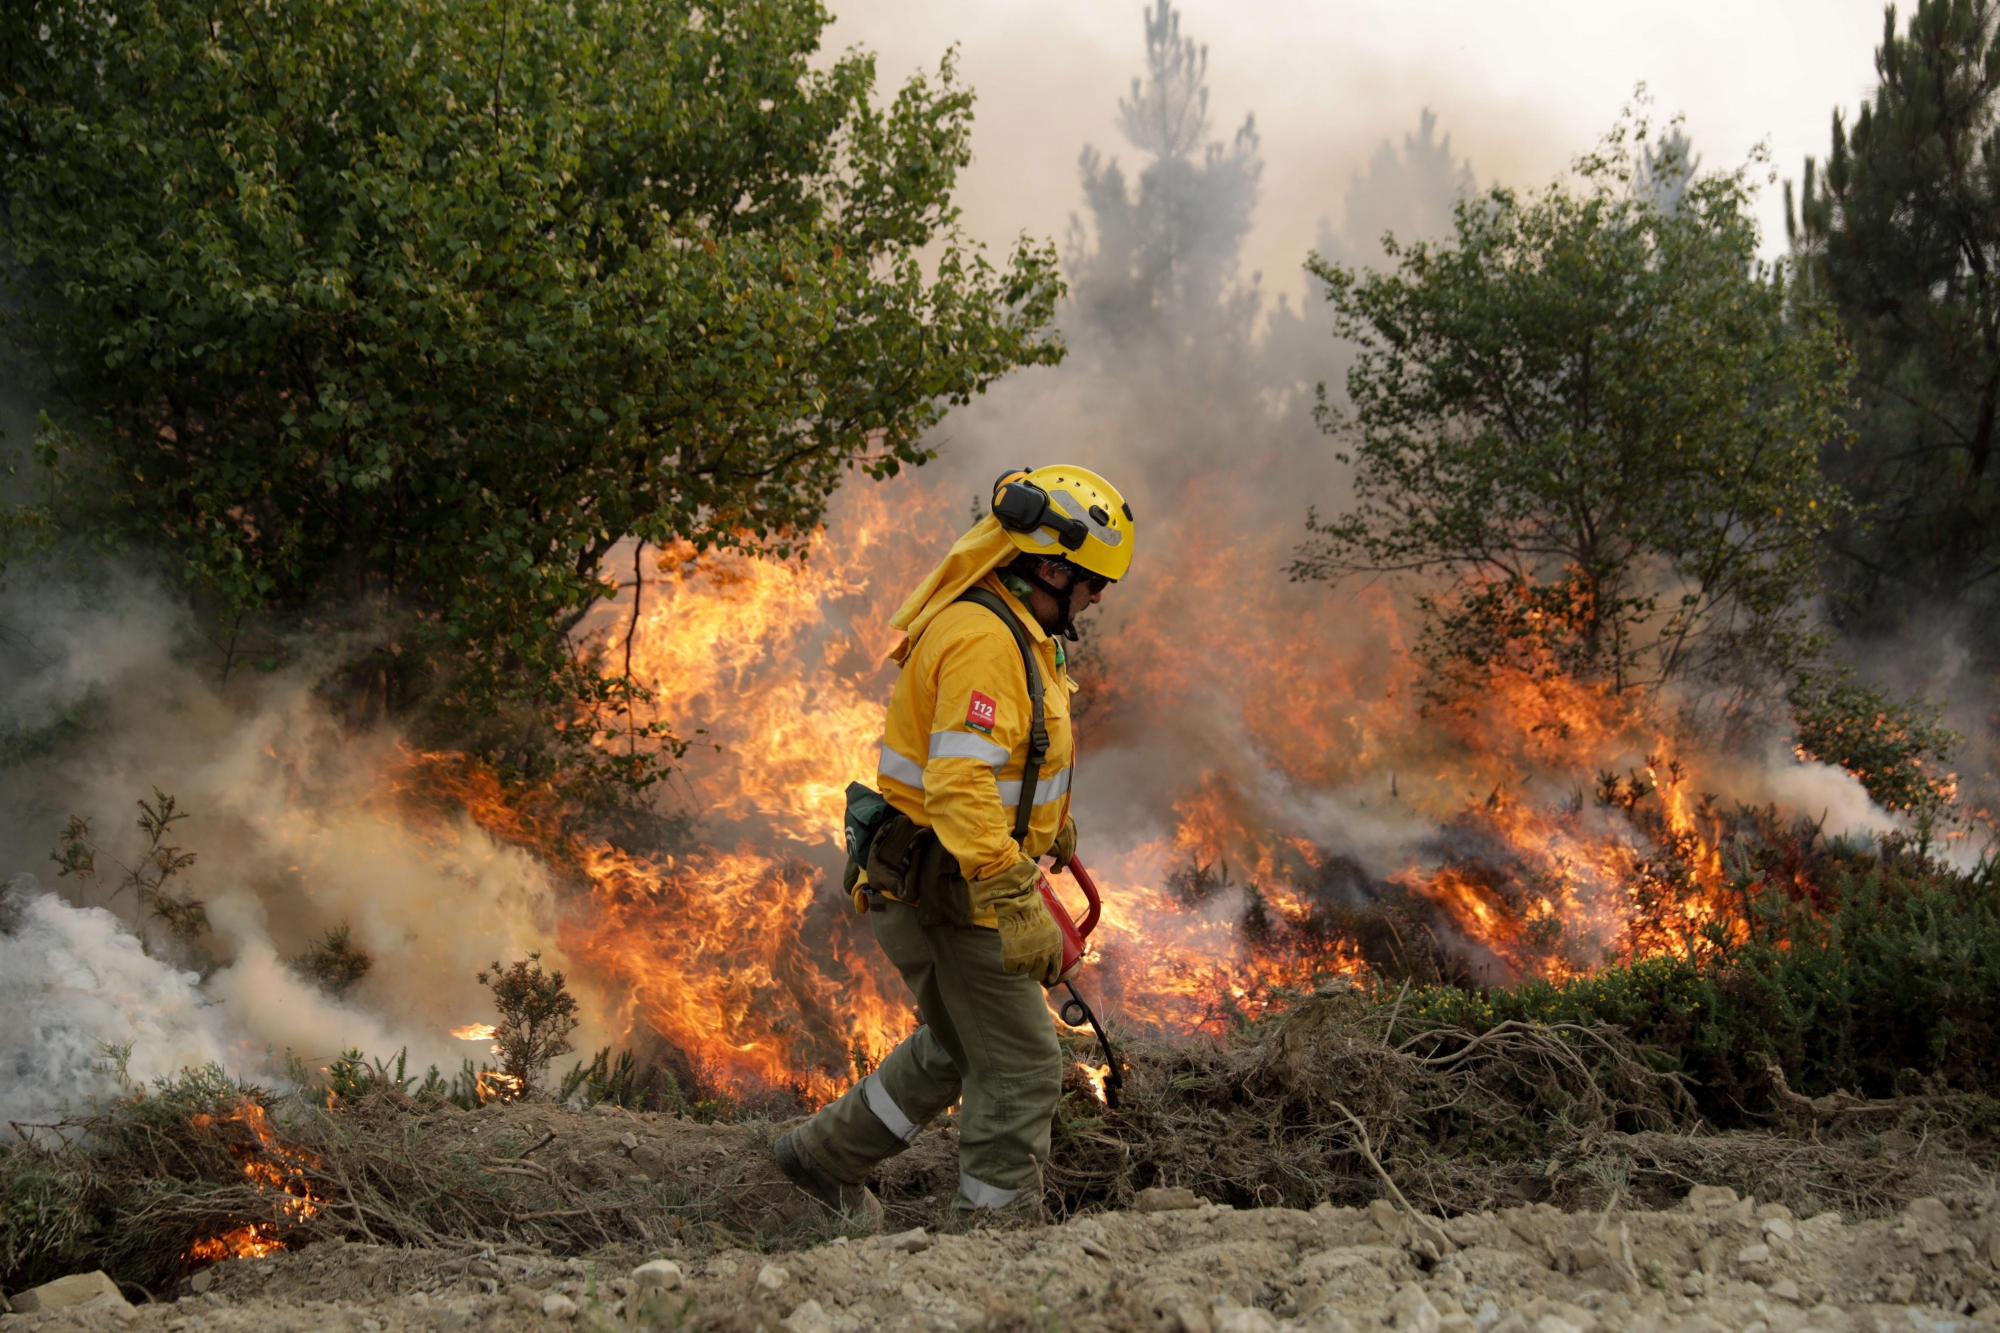 epa06041976 A Spanish specialist firefighter ignites a controlled fire on Alto do Soeirinho, as they fight the forest fire in Pampilhosa da Serra, center of Portugal, 21 June 2017. The wildfires in the center of Portugal gather 1153 firemen, 403 land vehicules, and 14 planes and helicopters.  EPA/TIAGO PETINGA PORTUGAL FIRES IN PAMPILHOSA